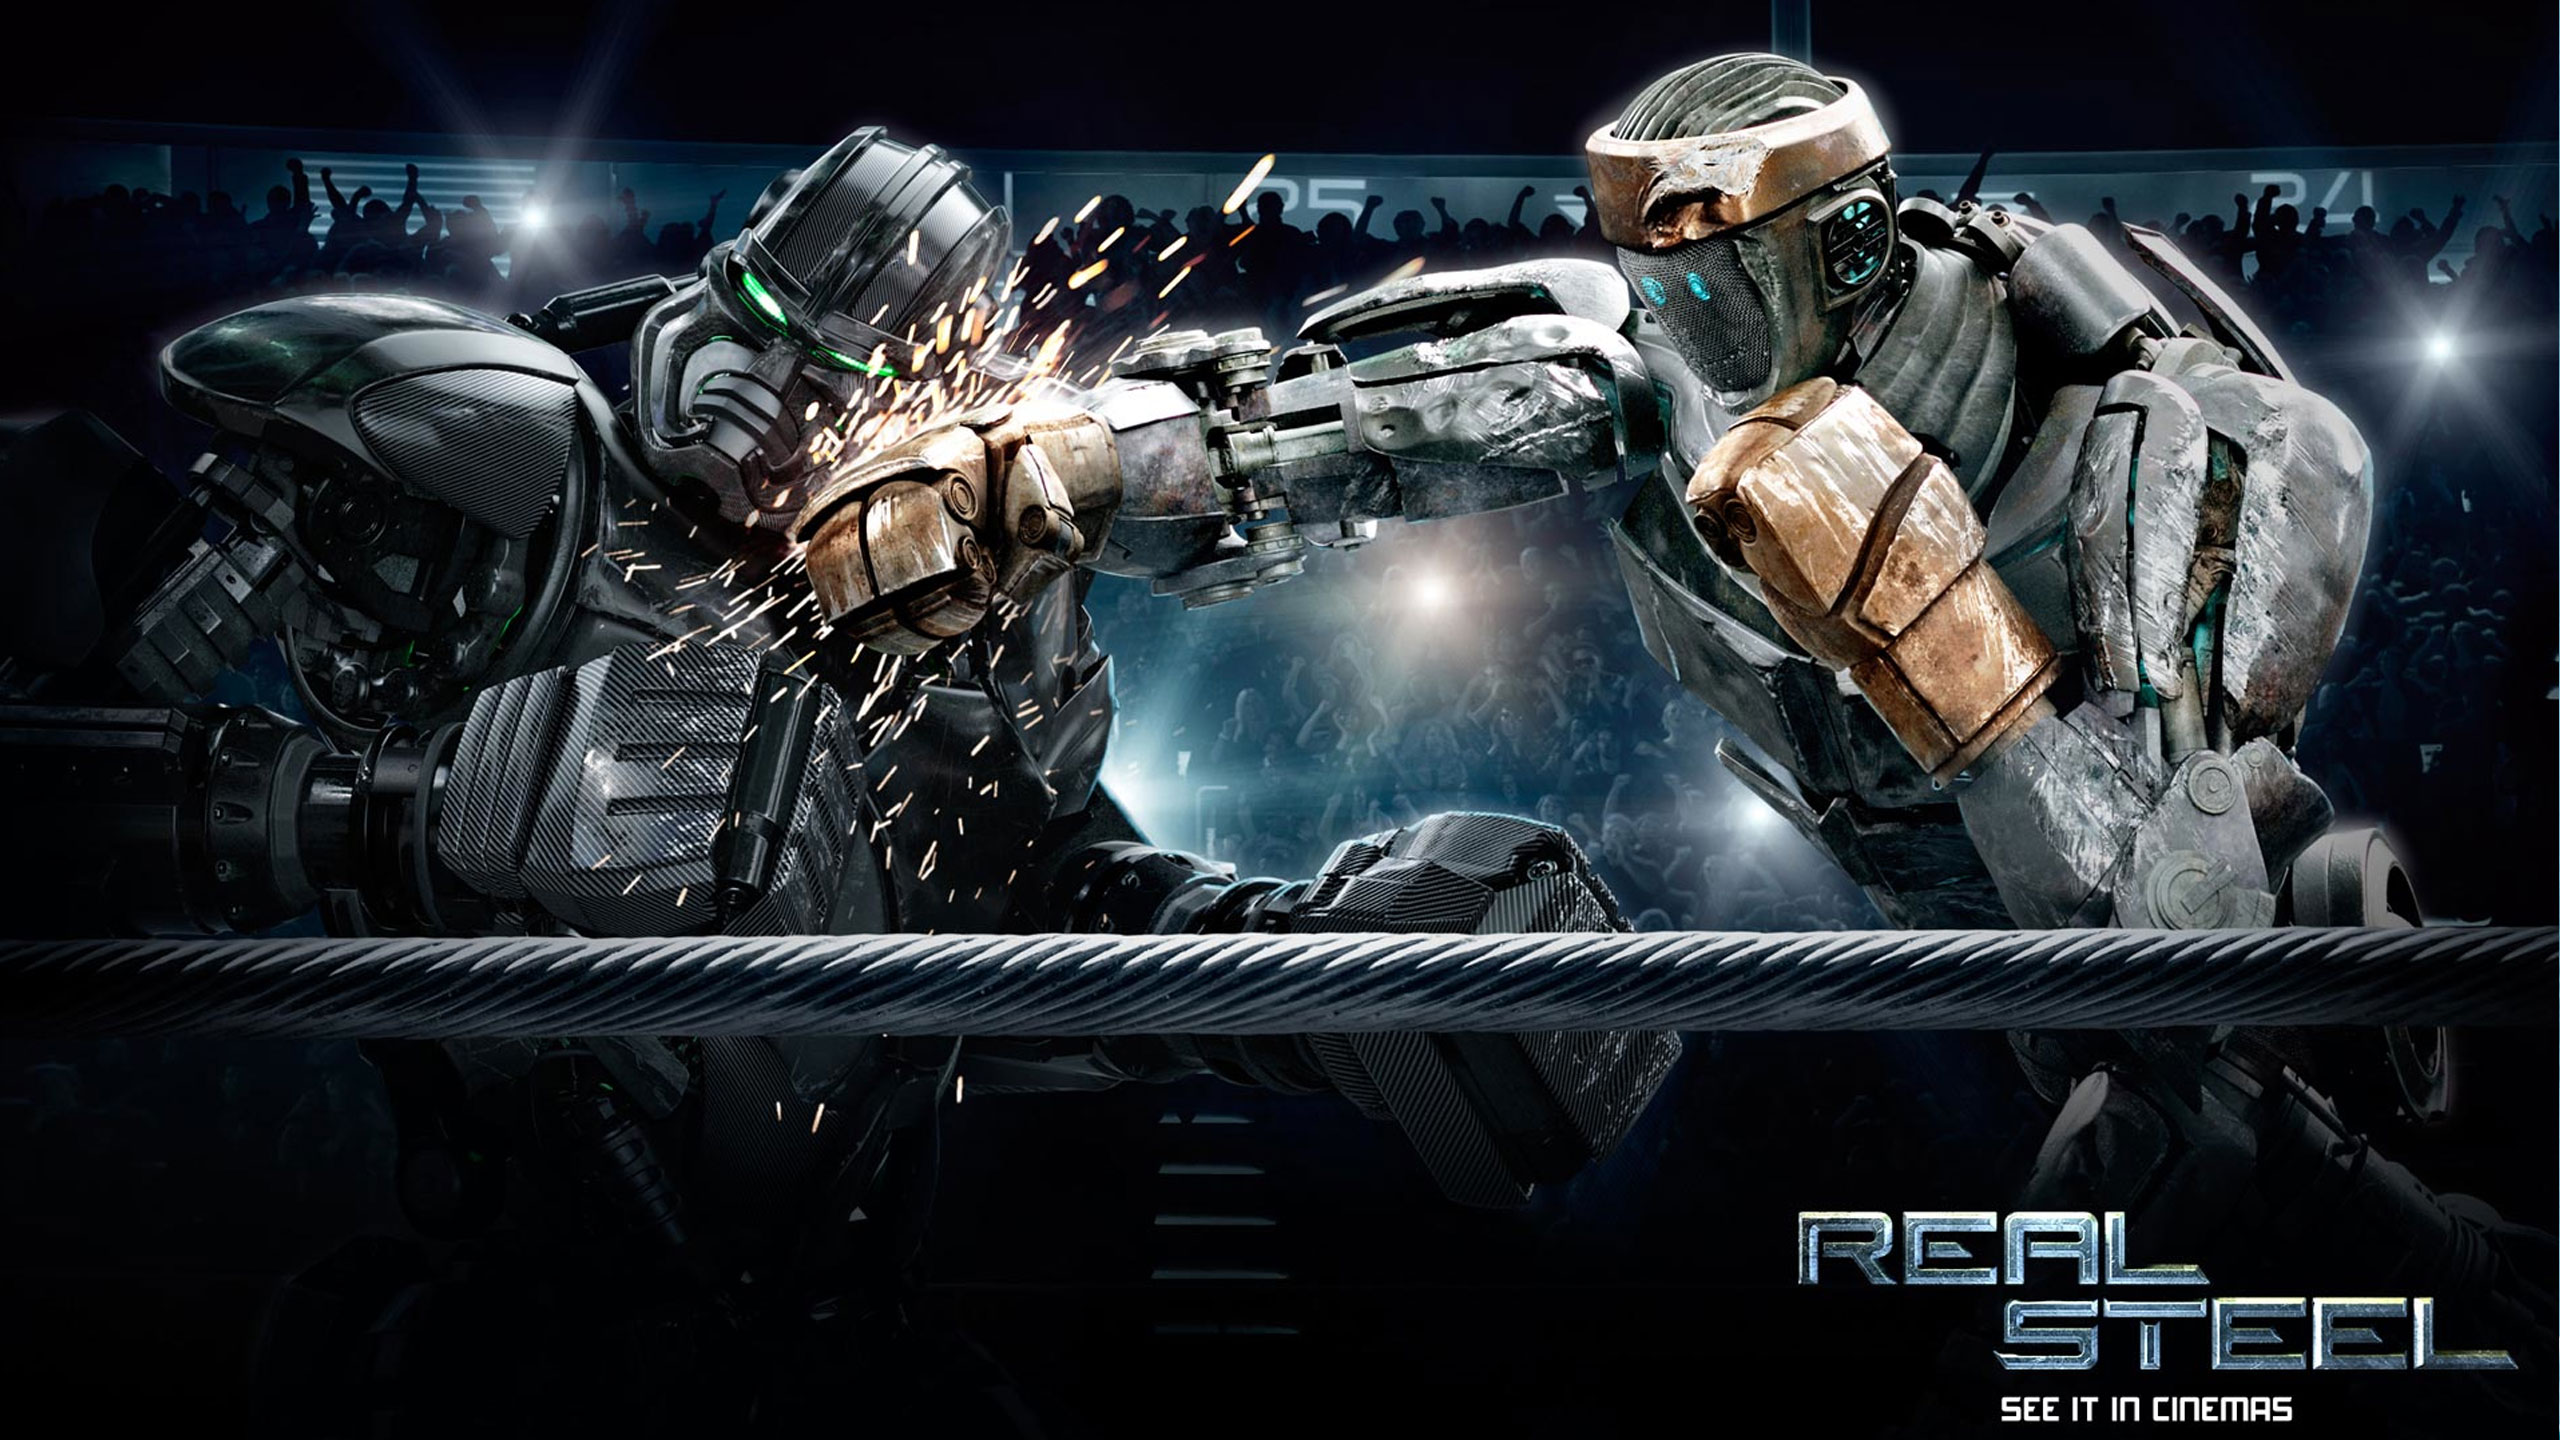 Real Steel Wallpapers Movie Hq Real Steel Pictures 4k Wallpapers 2019 - roblox crossroads wallpaper